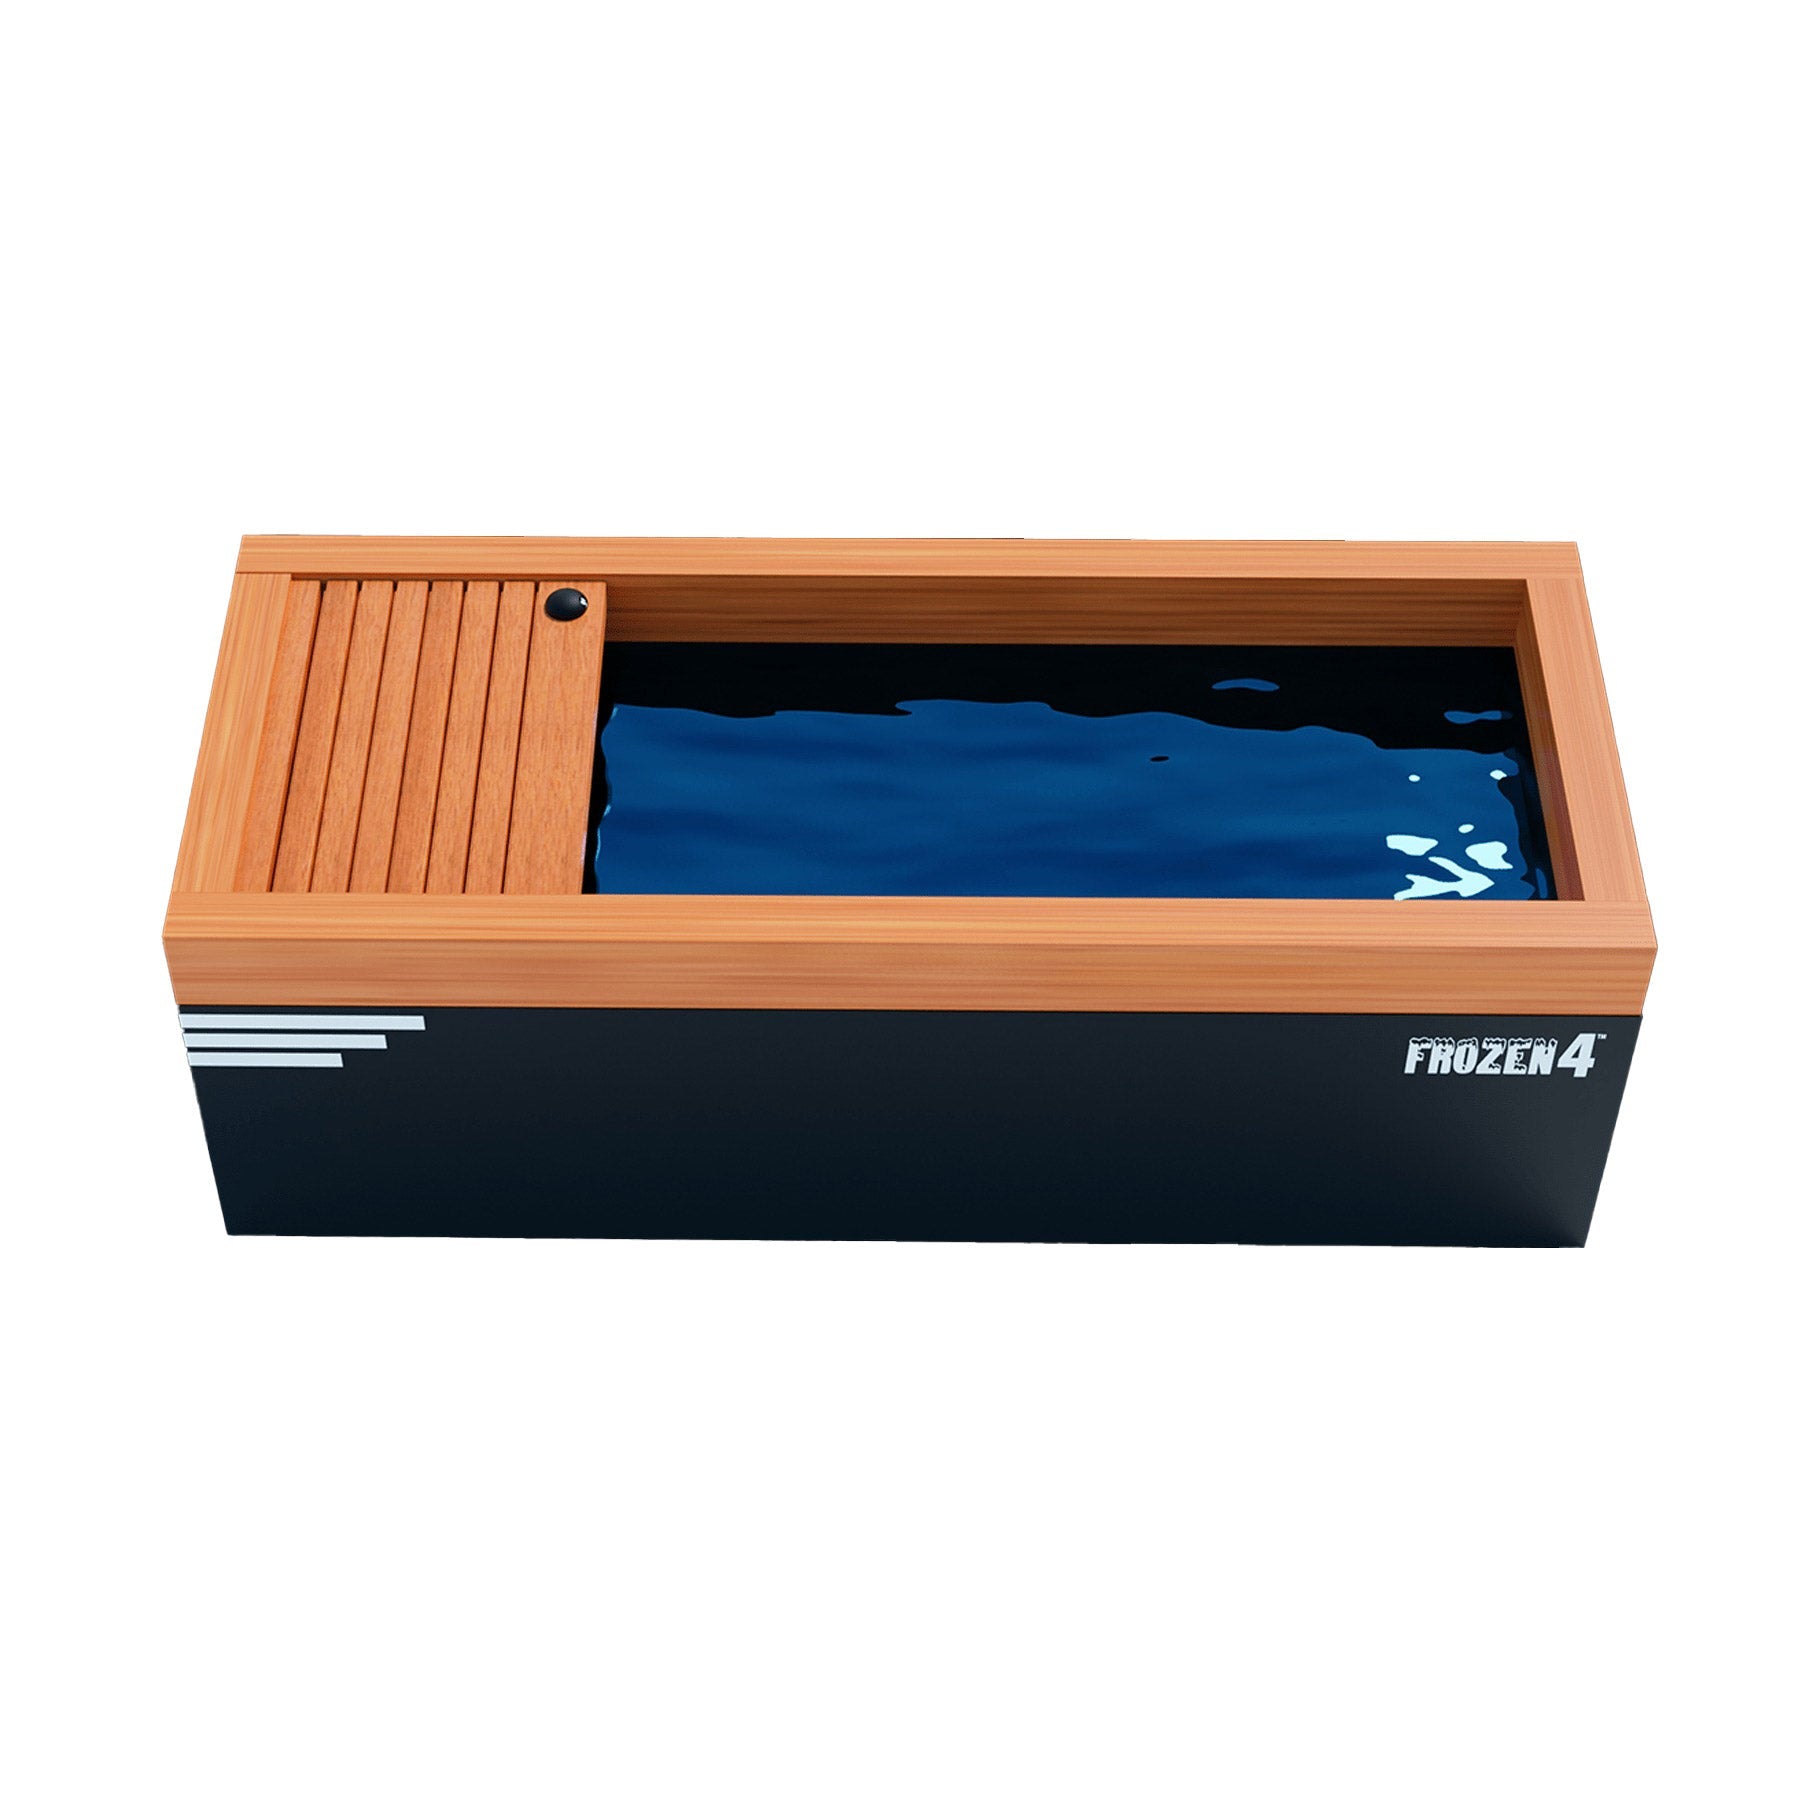 A wooden box with water in it, transformed into a Medical Sauna Frozen 4 Cold Plunge chamber.